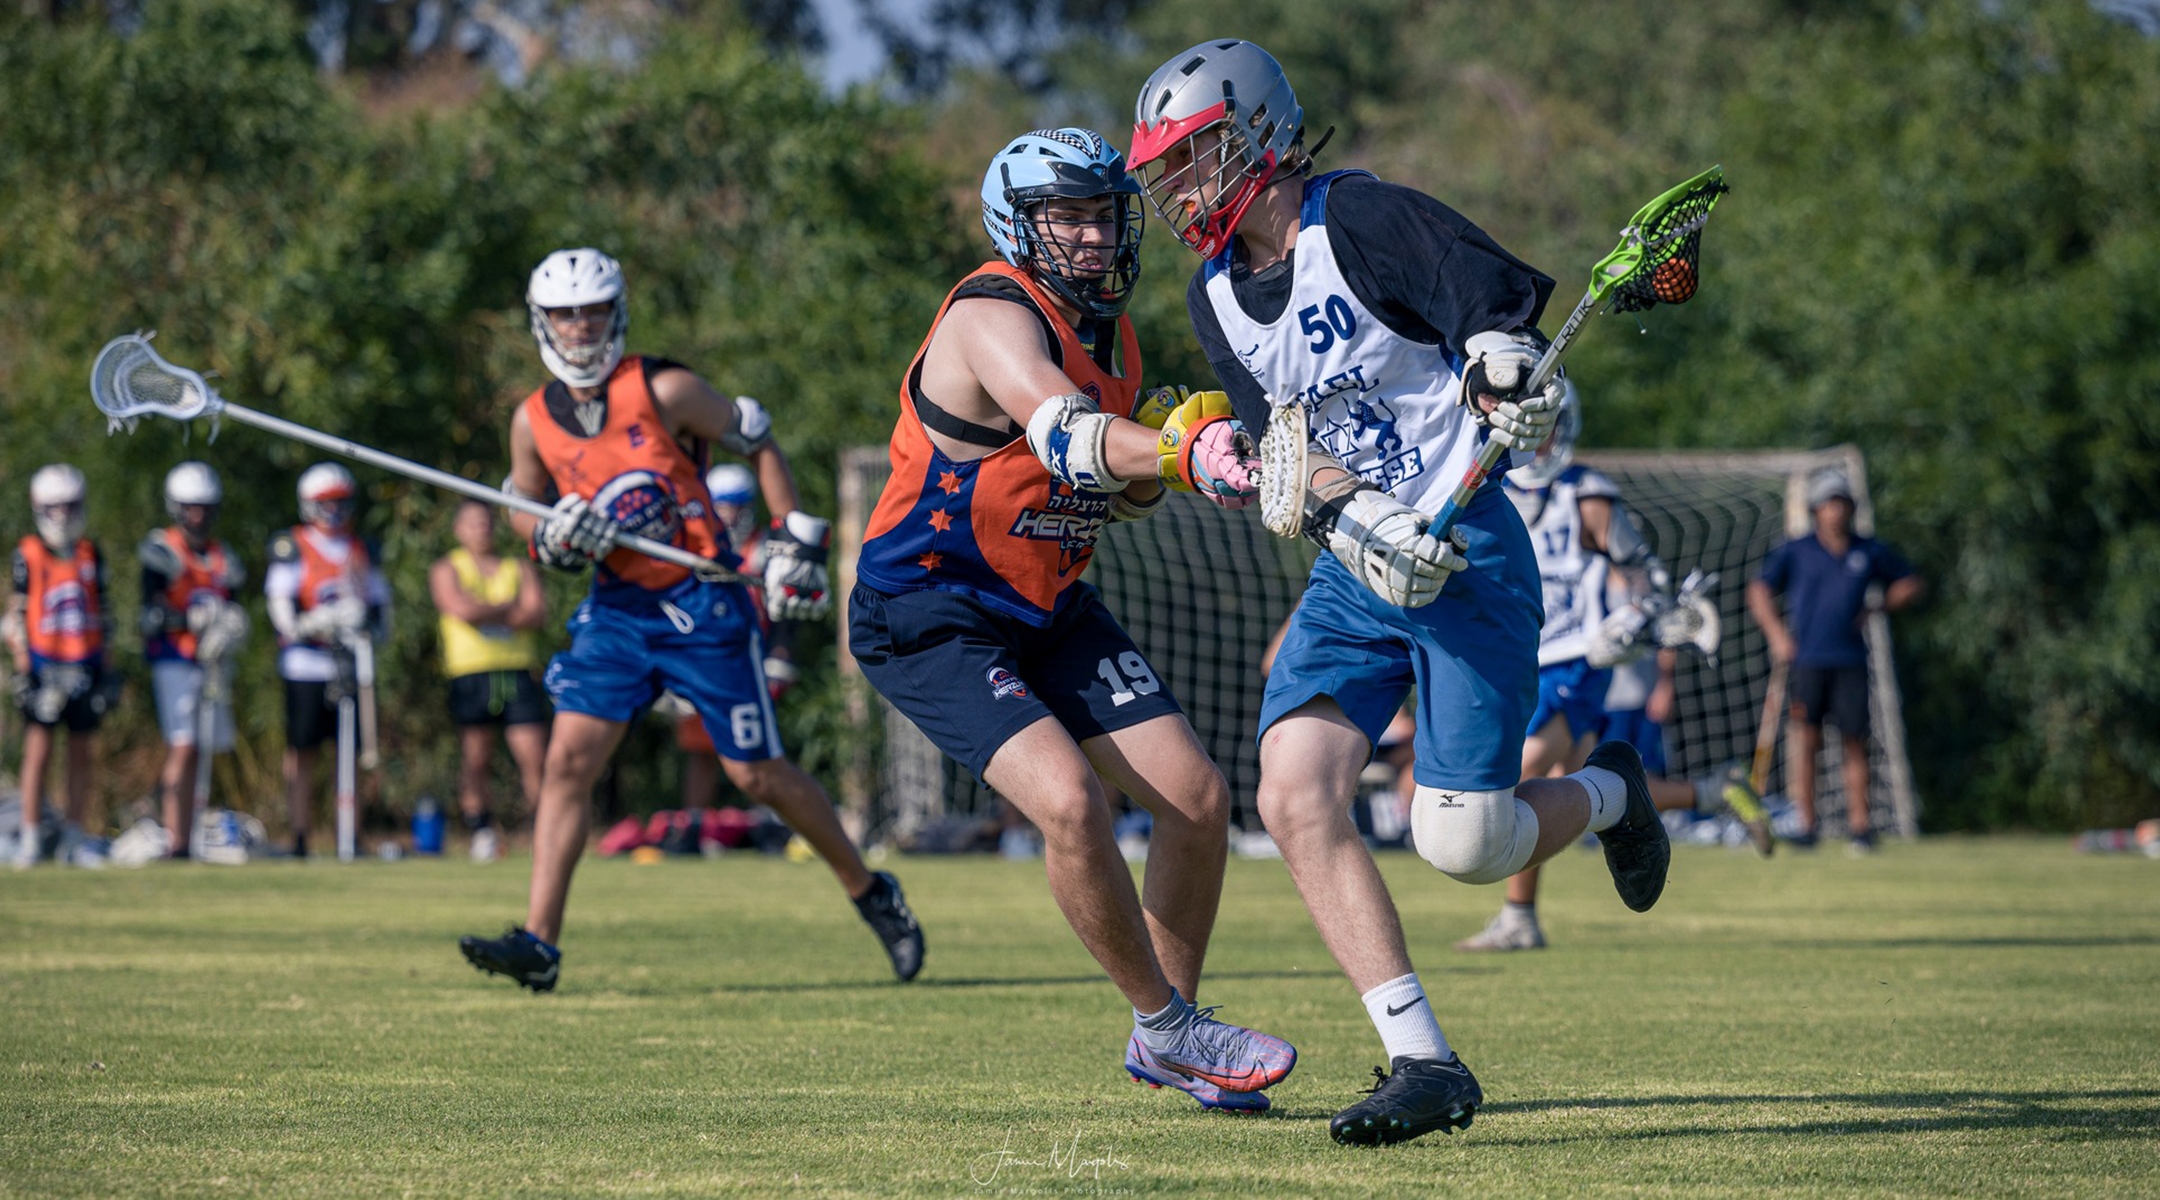 Lacrosse is catching on in Israel, where 300-400 children and teens are now playing the sport. (Courtesy of the Israel Lacrosse Association)